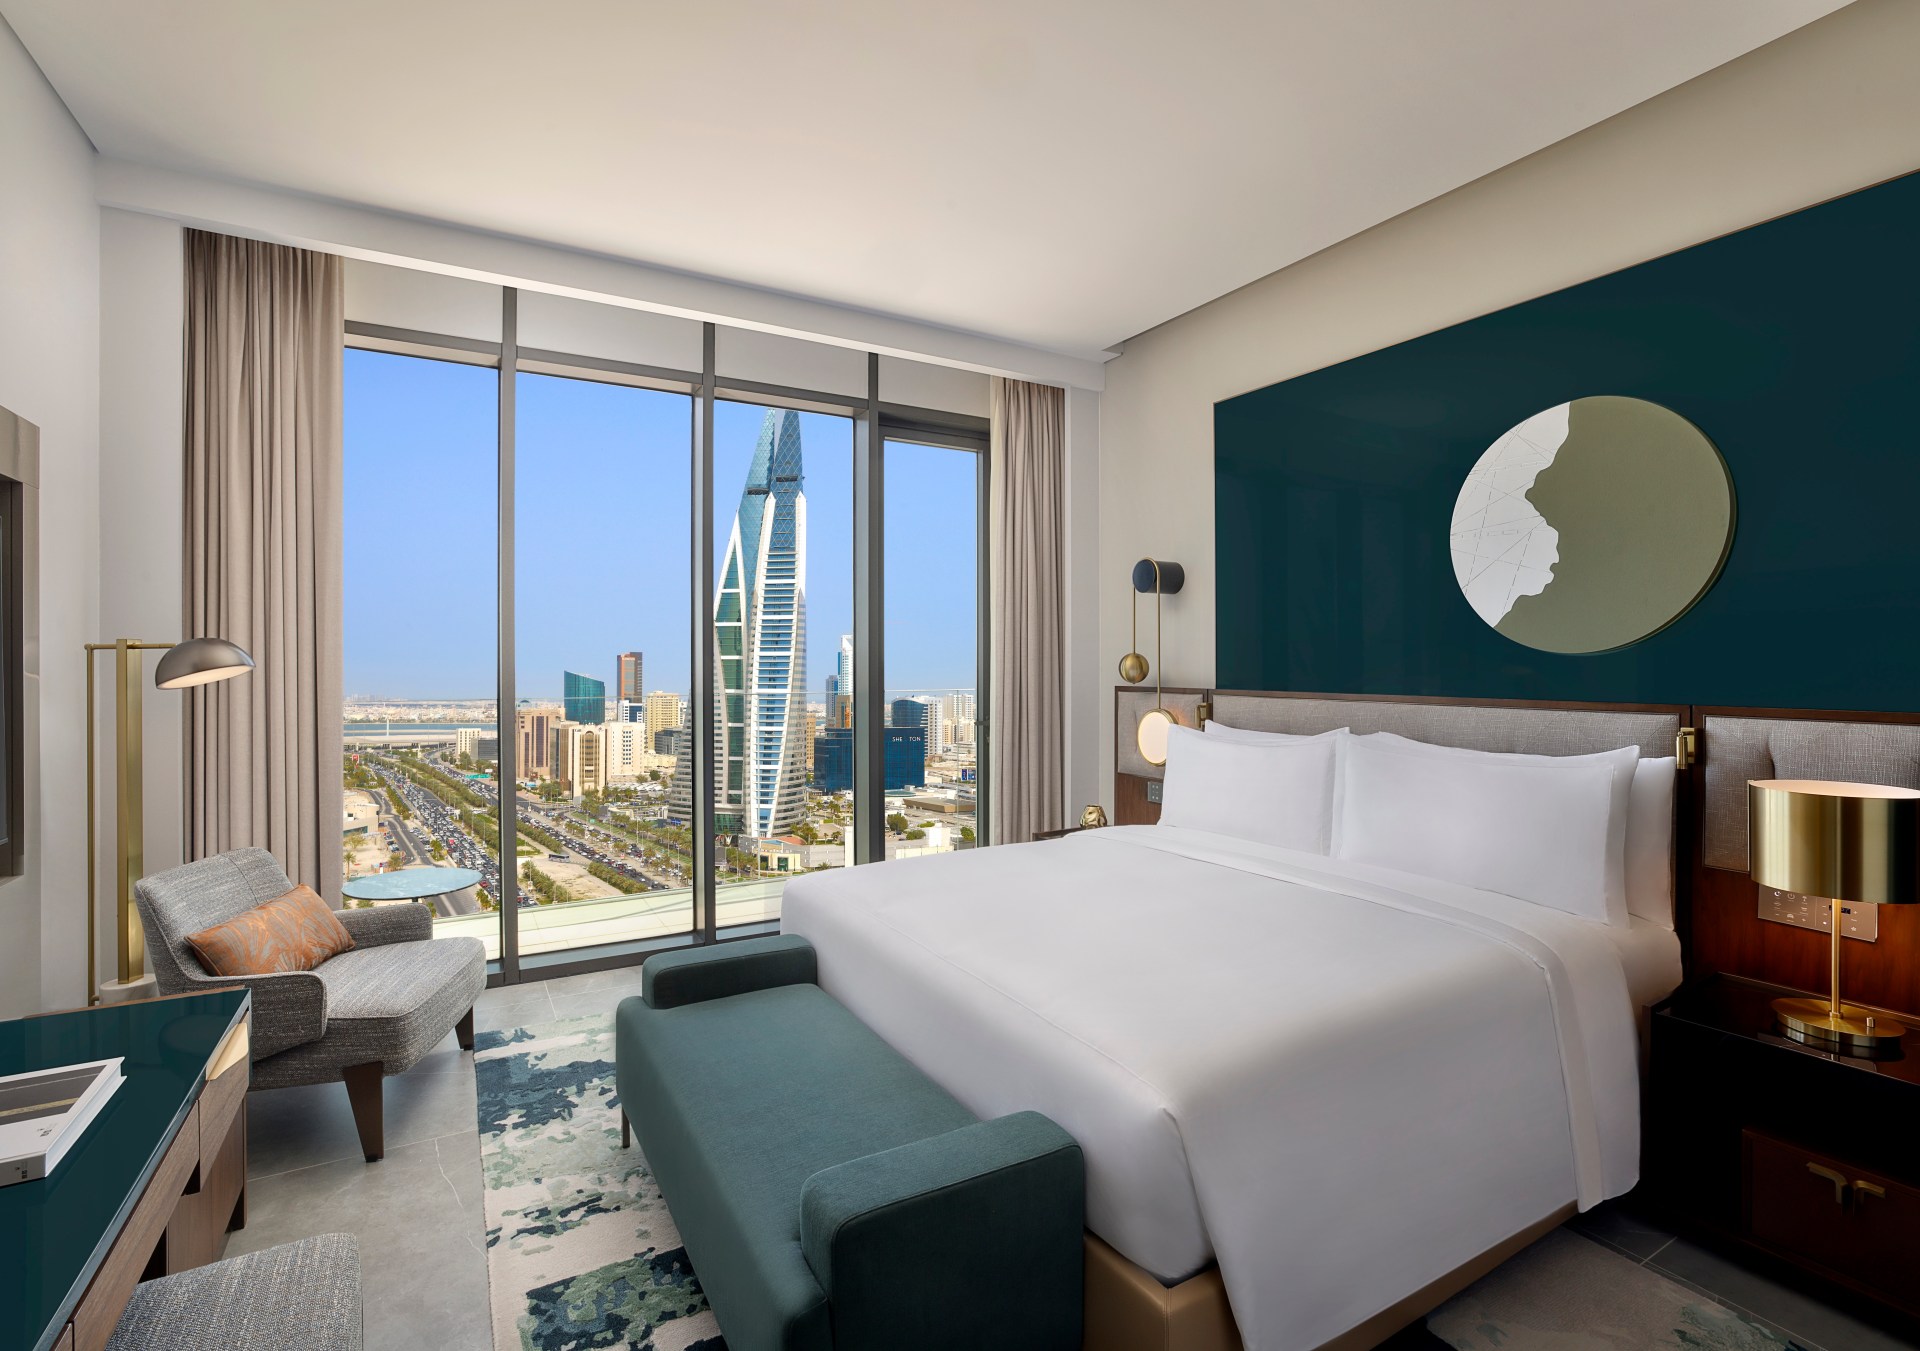 Conrad Bahrain Financial Harbour - King Premier Three Bedroom Residential Suite - bedroom with large windows overlooking the city